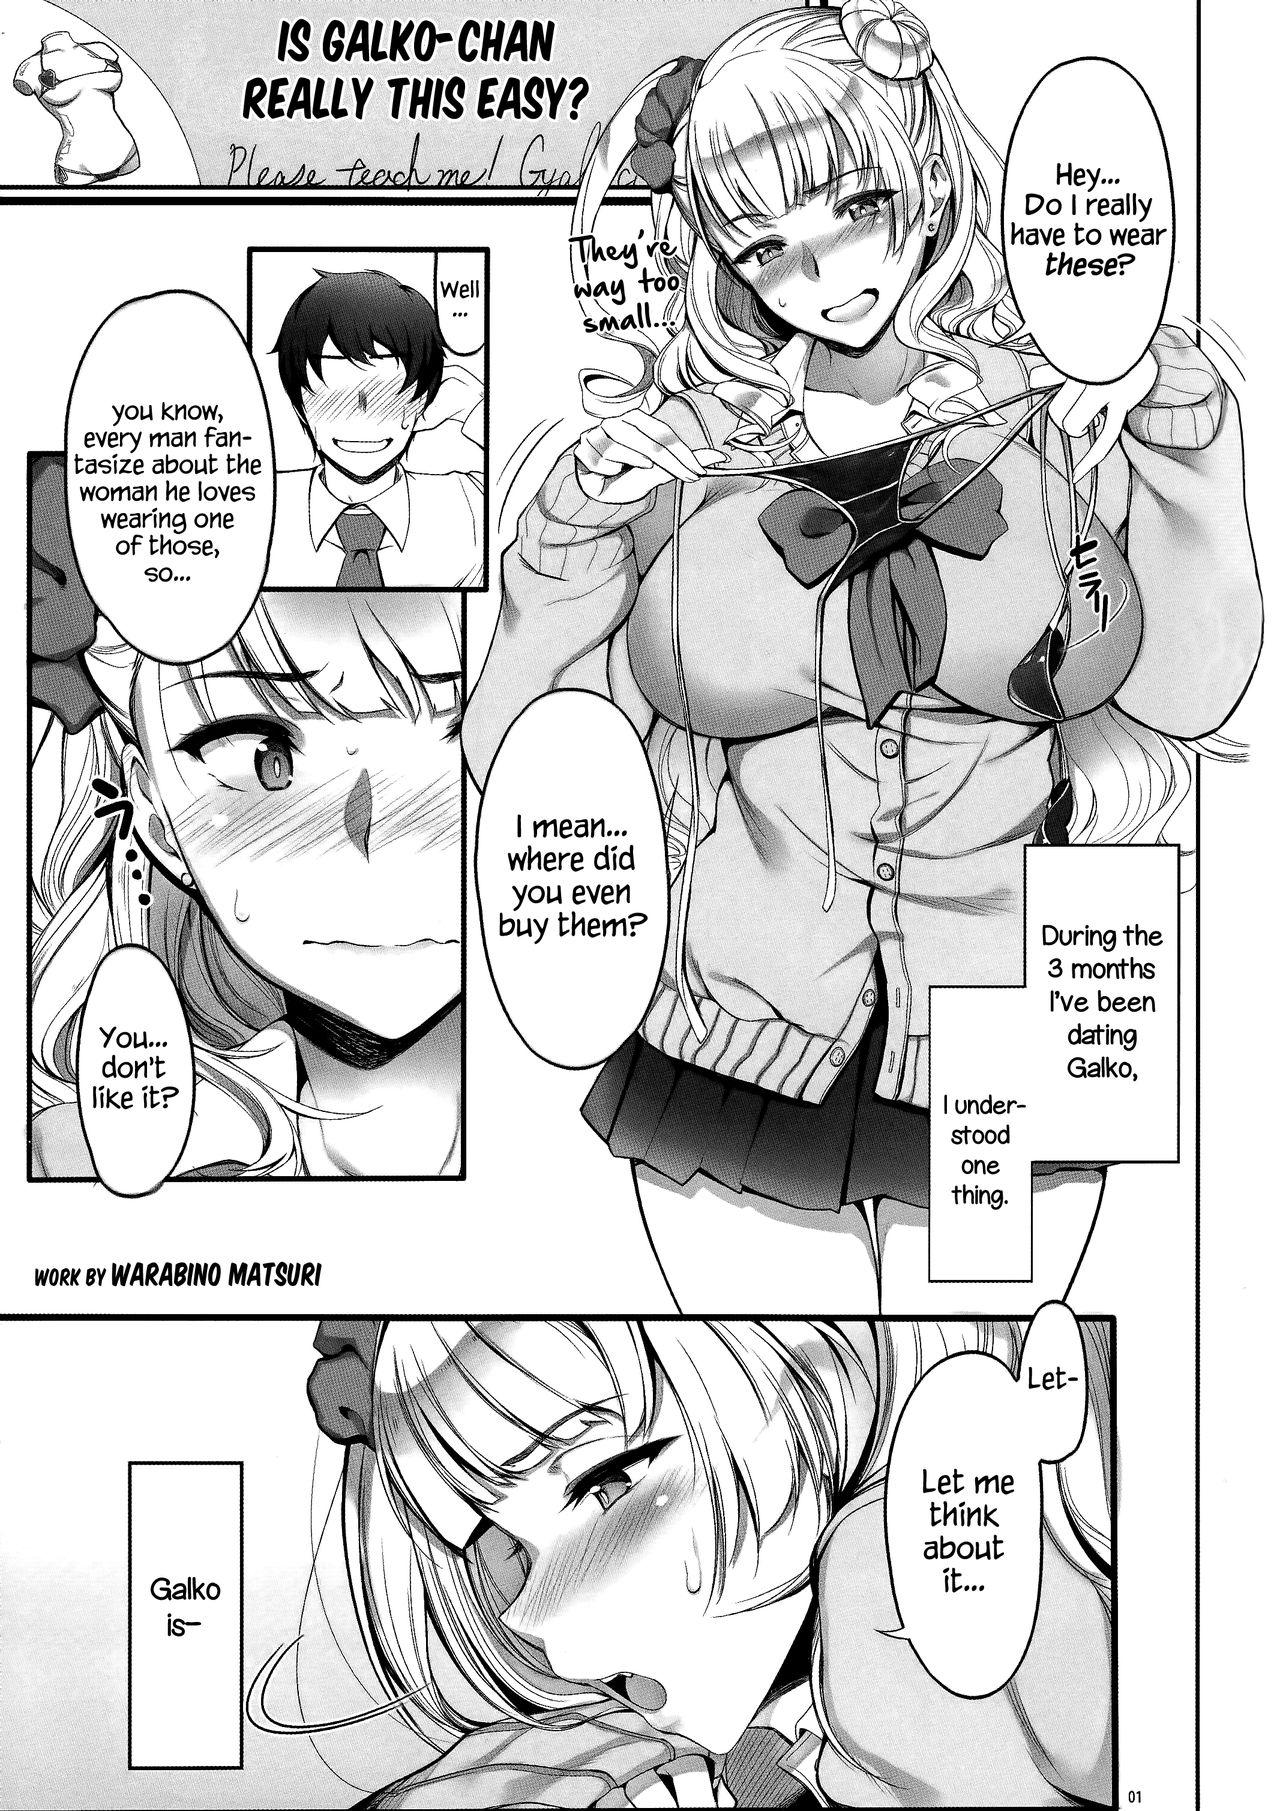 Black Girl Angel's Stroke 87b Galko-chan 0.02!! - Oshiete galko-chan Clothed - Page 3